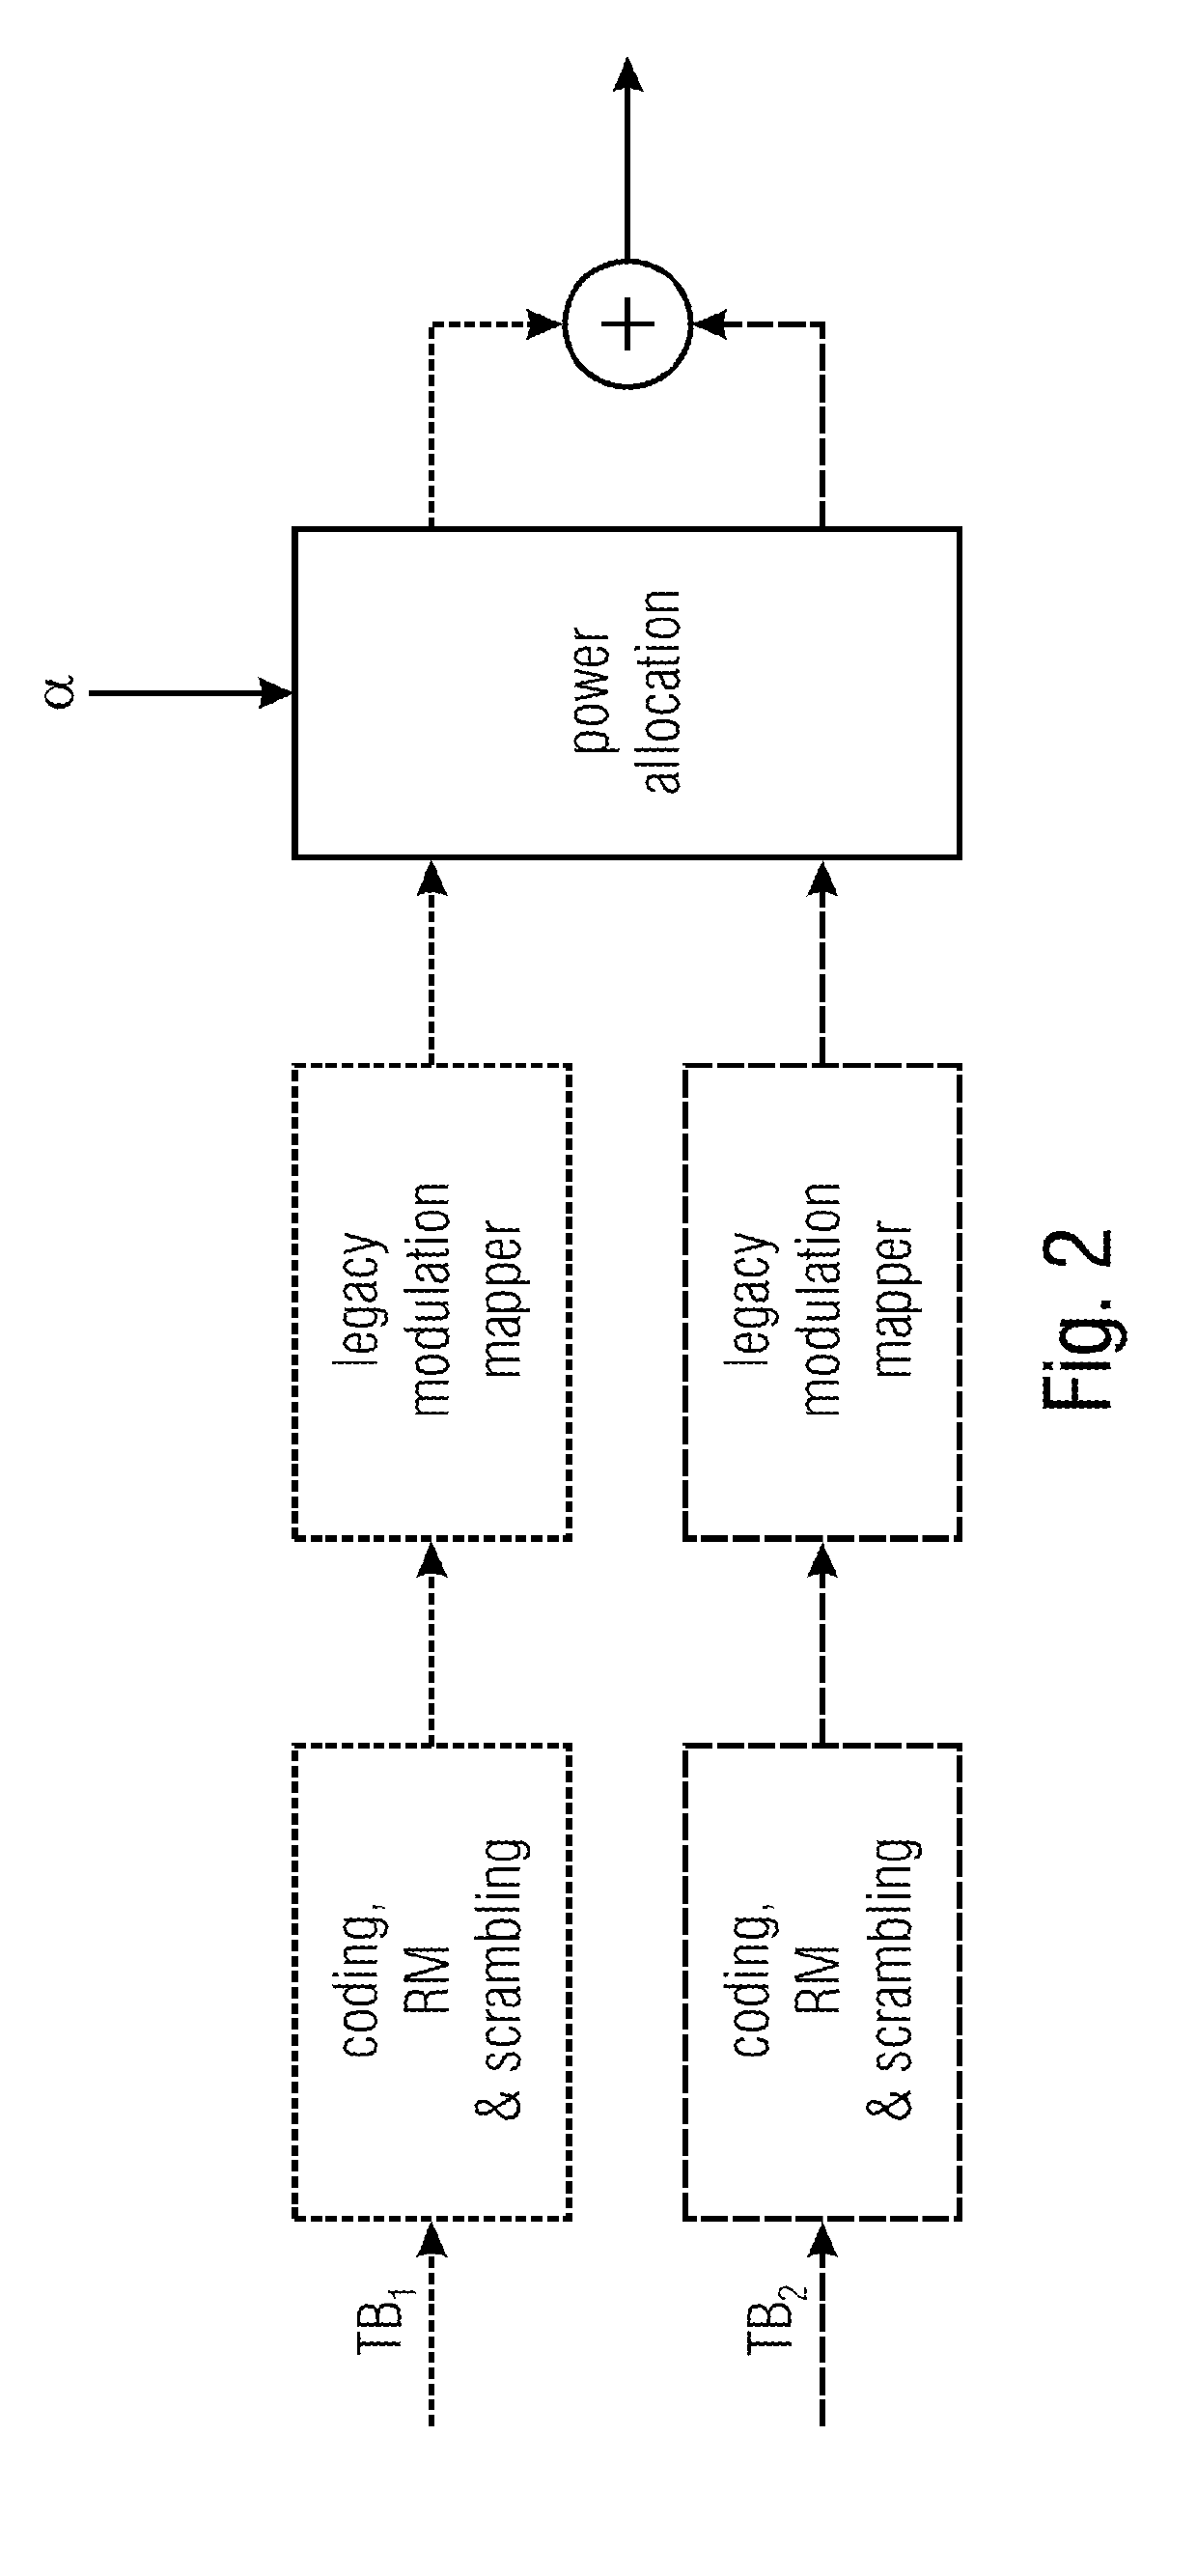 Transmission concept using multi-user superposition coding